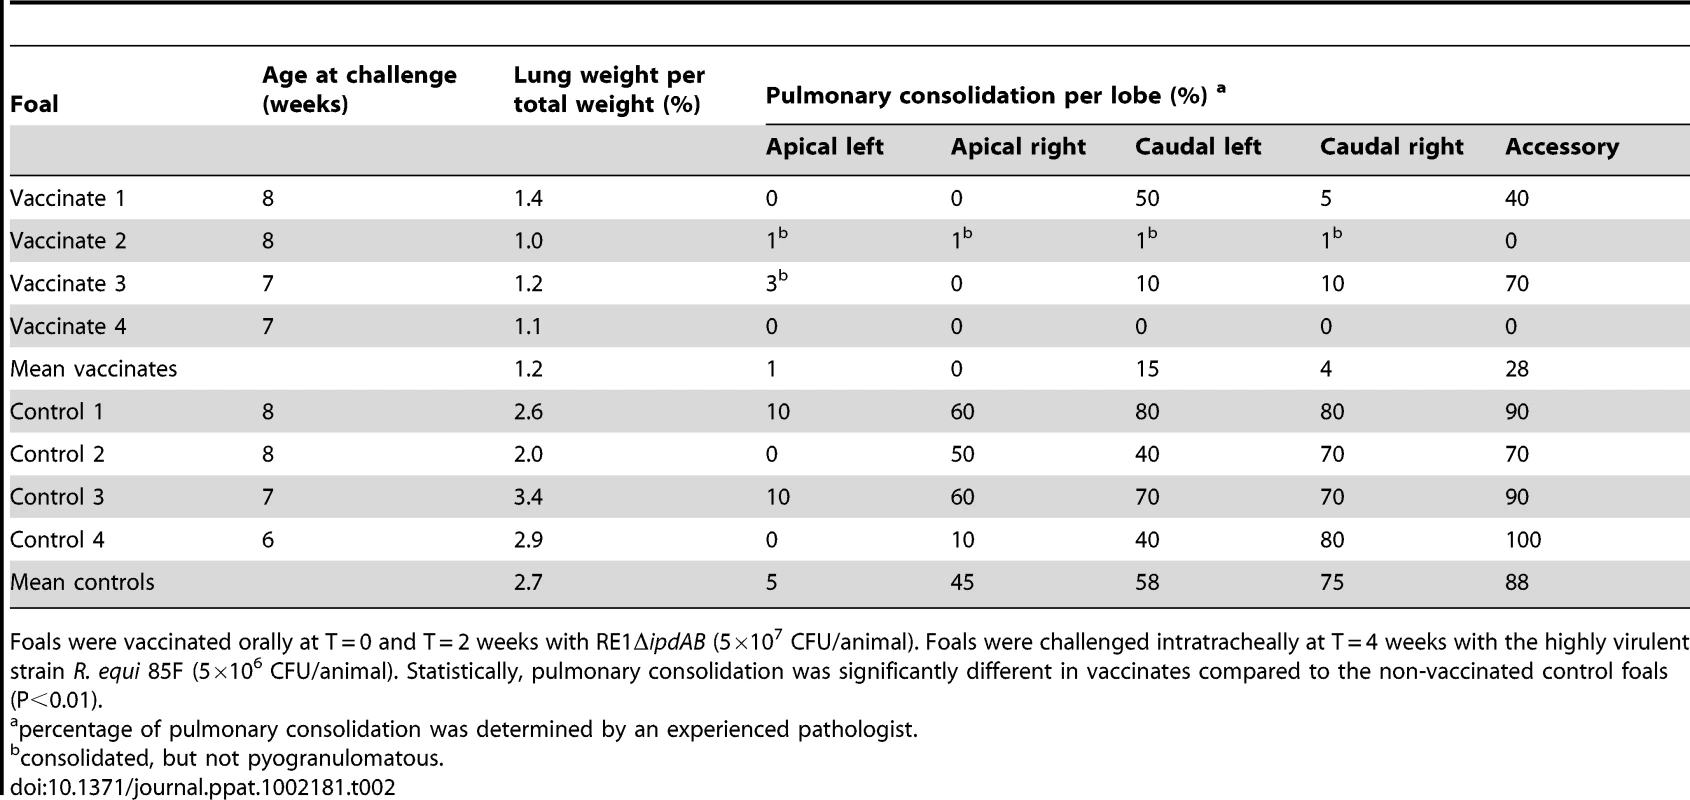 Lung weights and percentage pulmonary consolidation per lobe of vaccinated and unvaccinated (control) 2 to 4-week-old foals (n = 4).